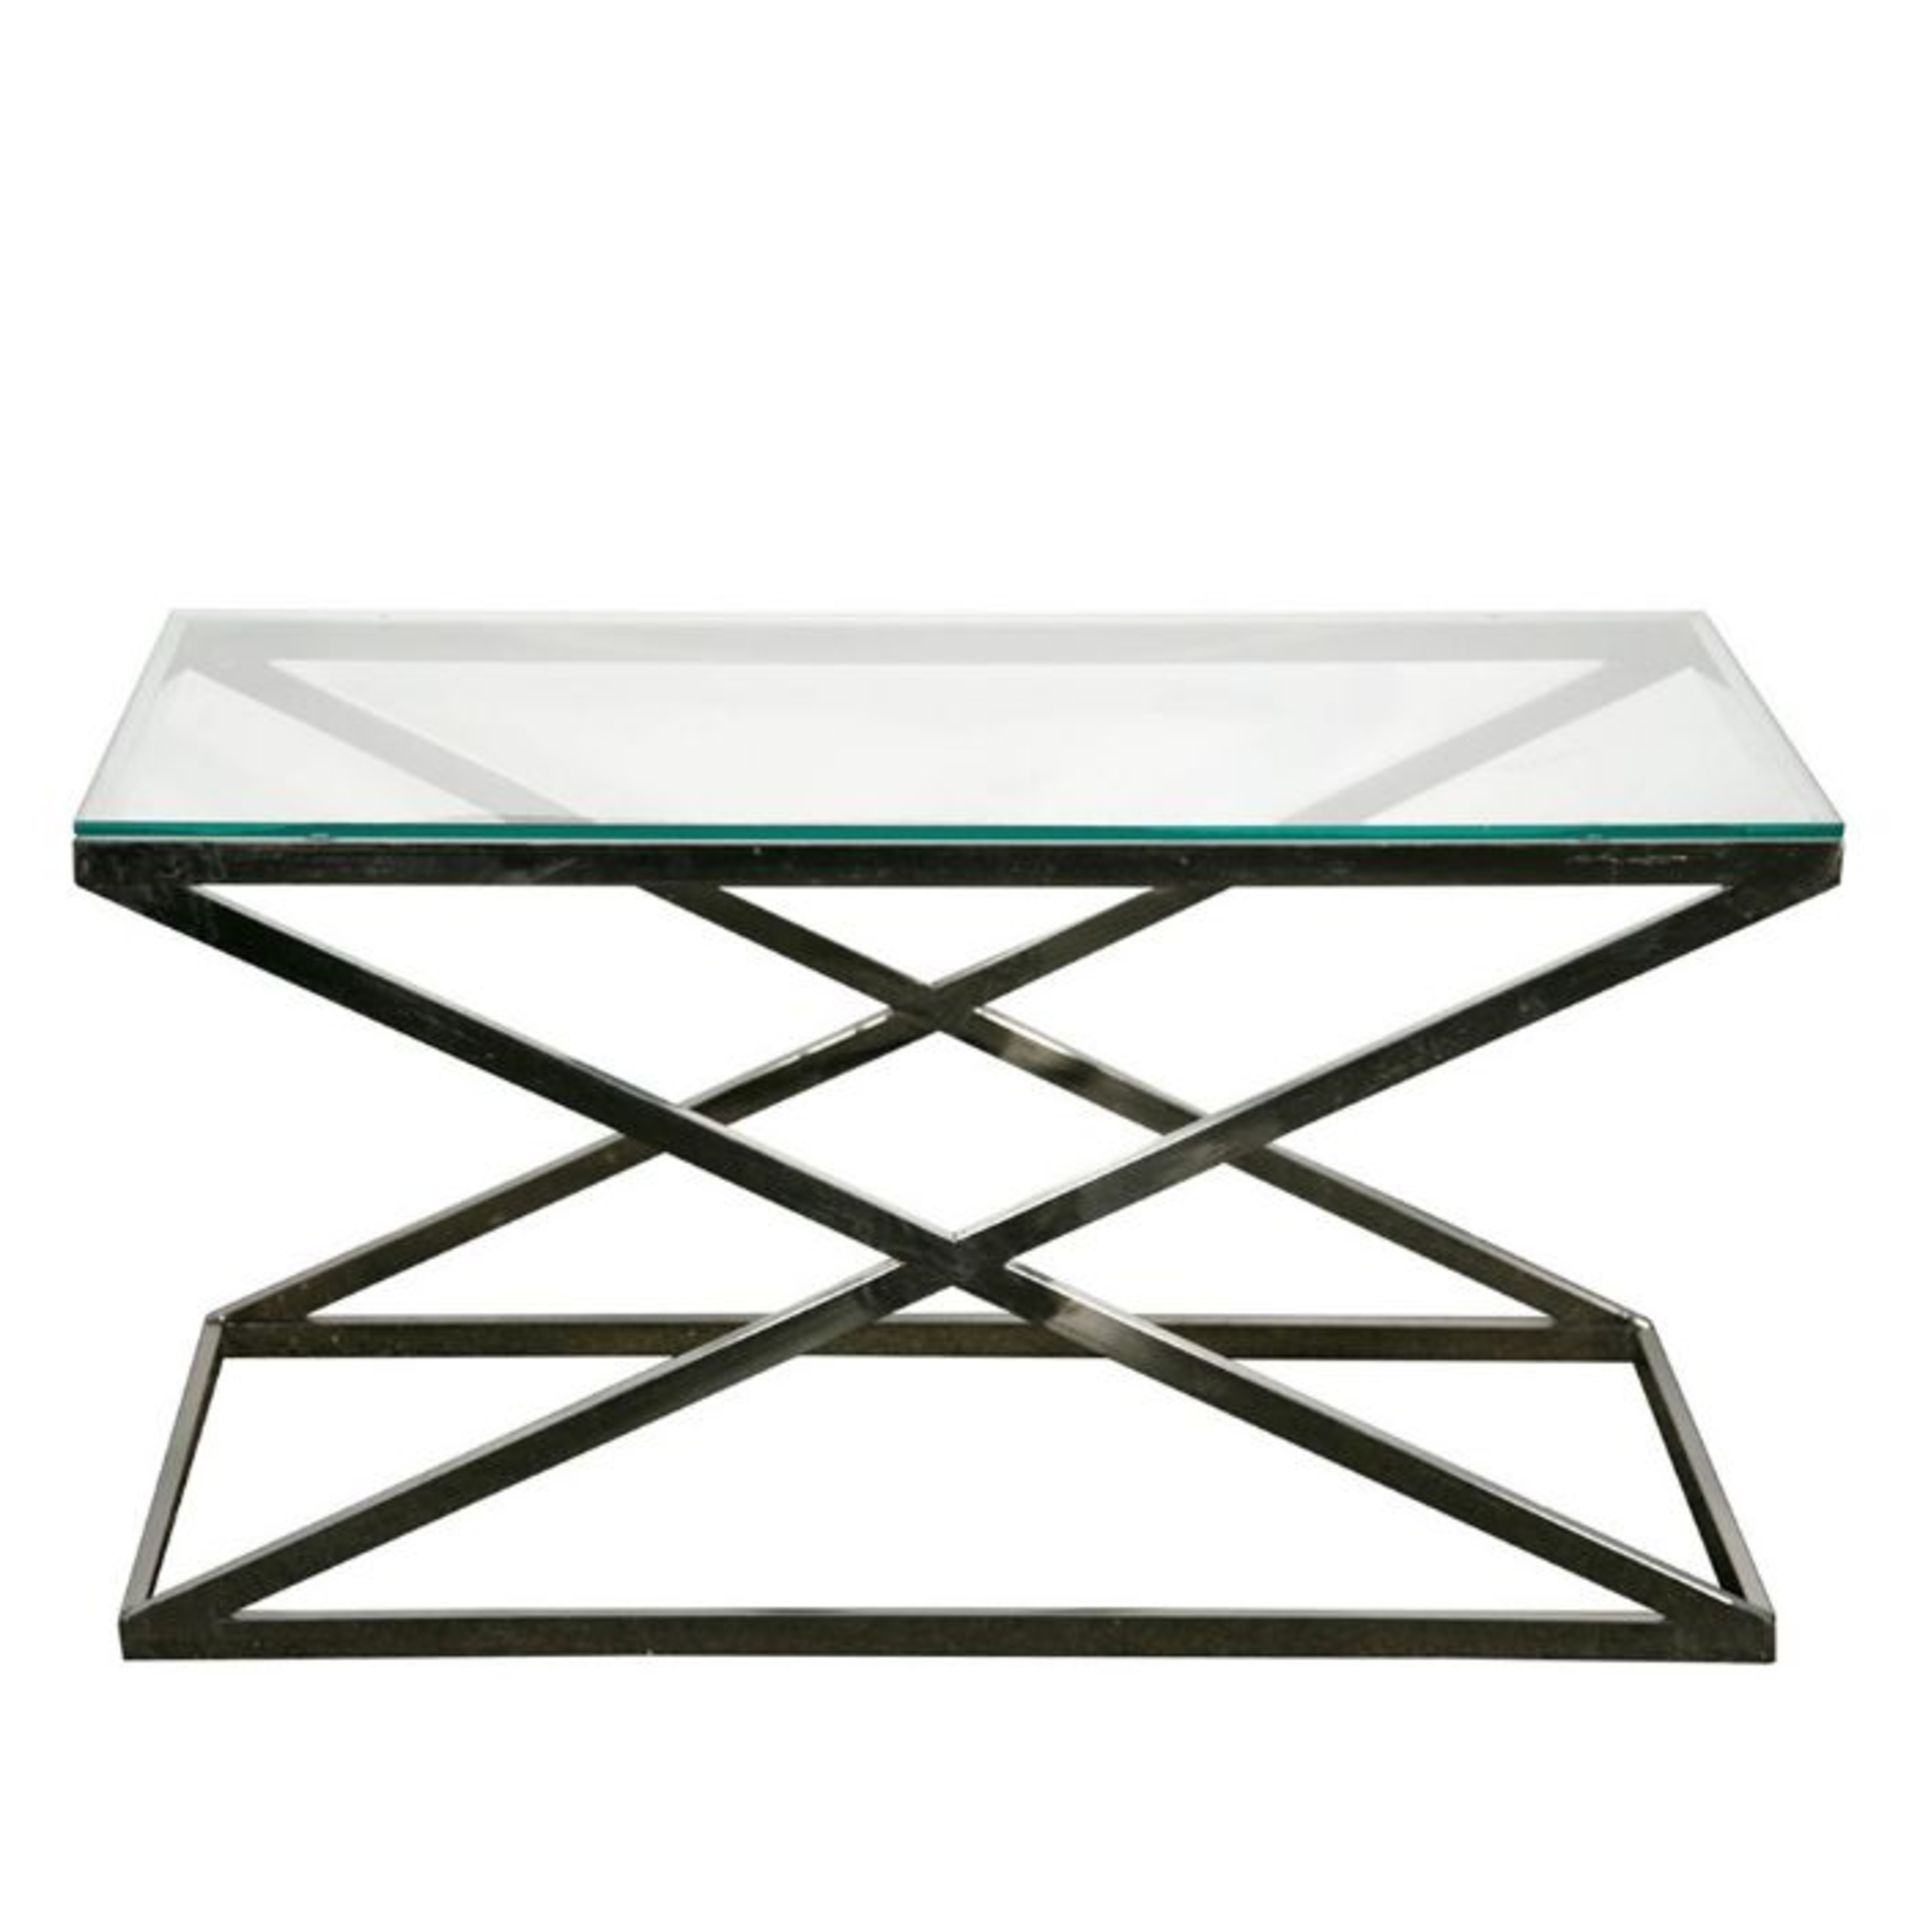 GLASS COFEE TABLE (BOXED, NOT CHECKED) (PALLET 8)